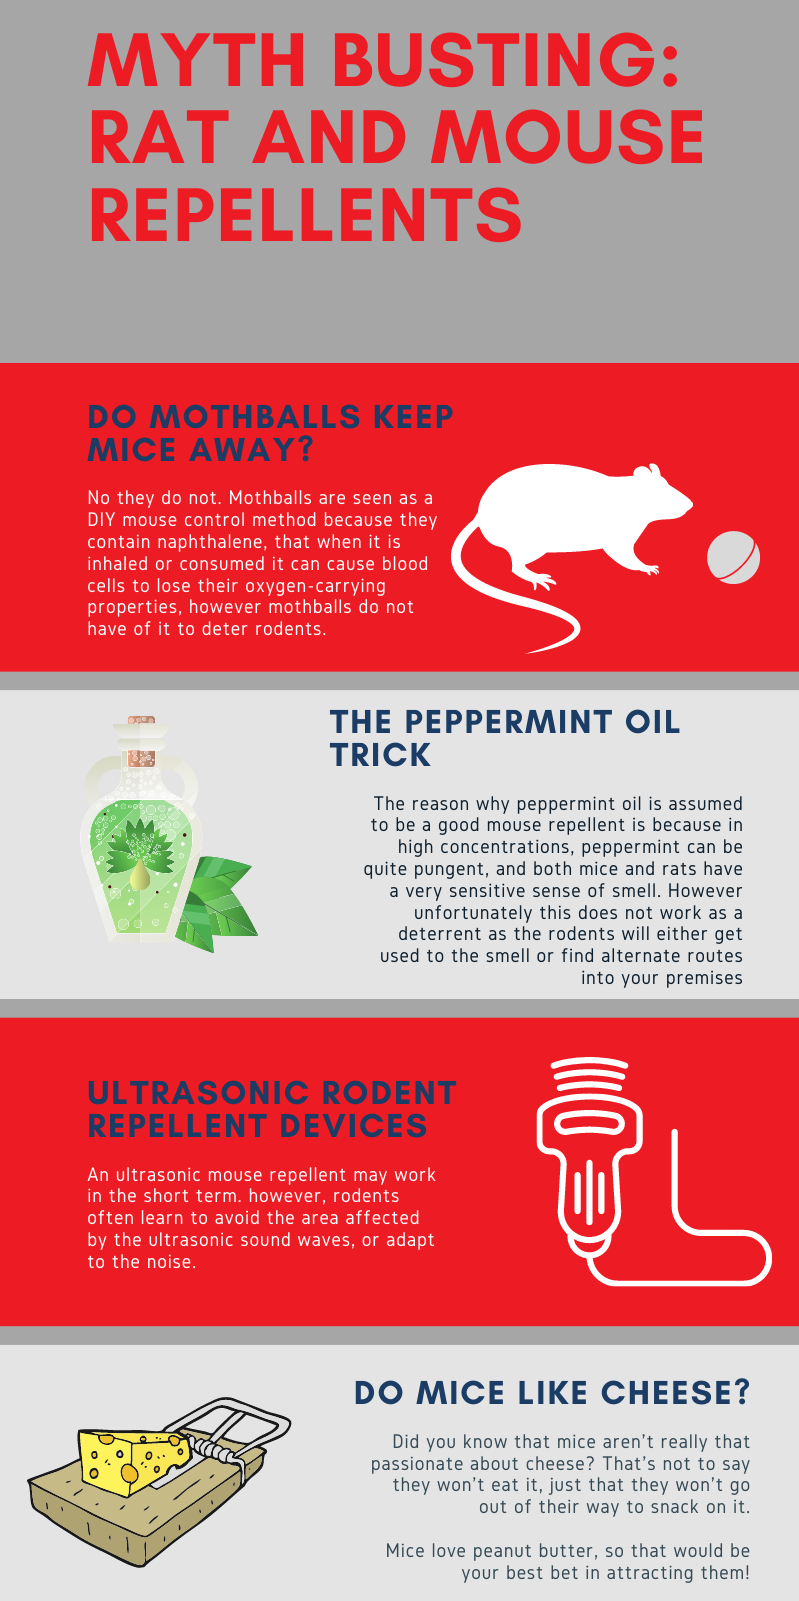 Myth Busting Rat and Mouse Repellents Infographic - summary of repellent myths